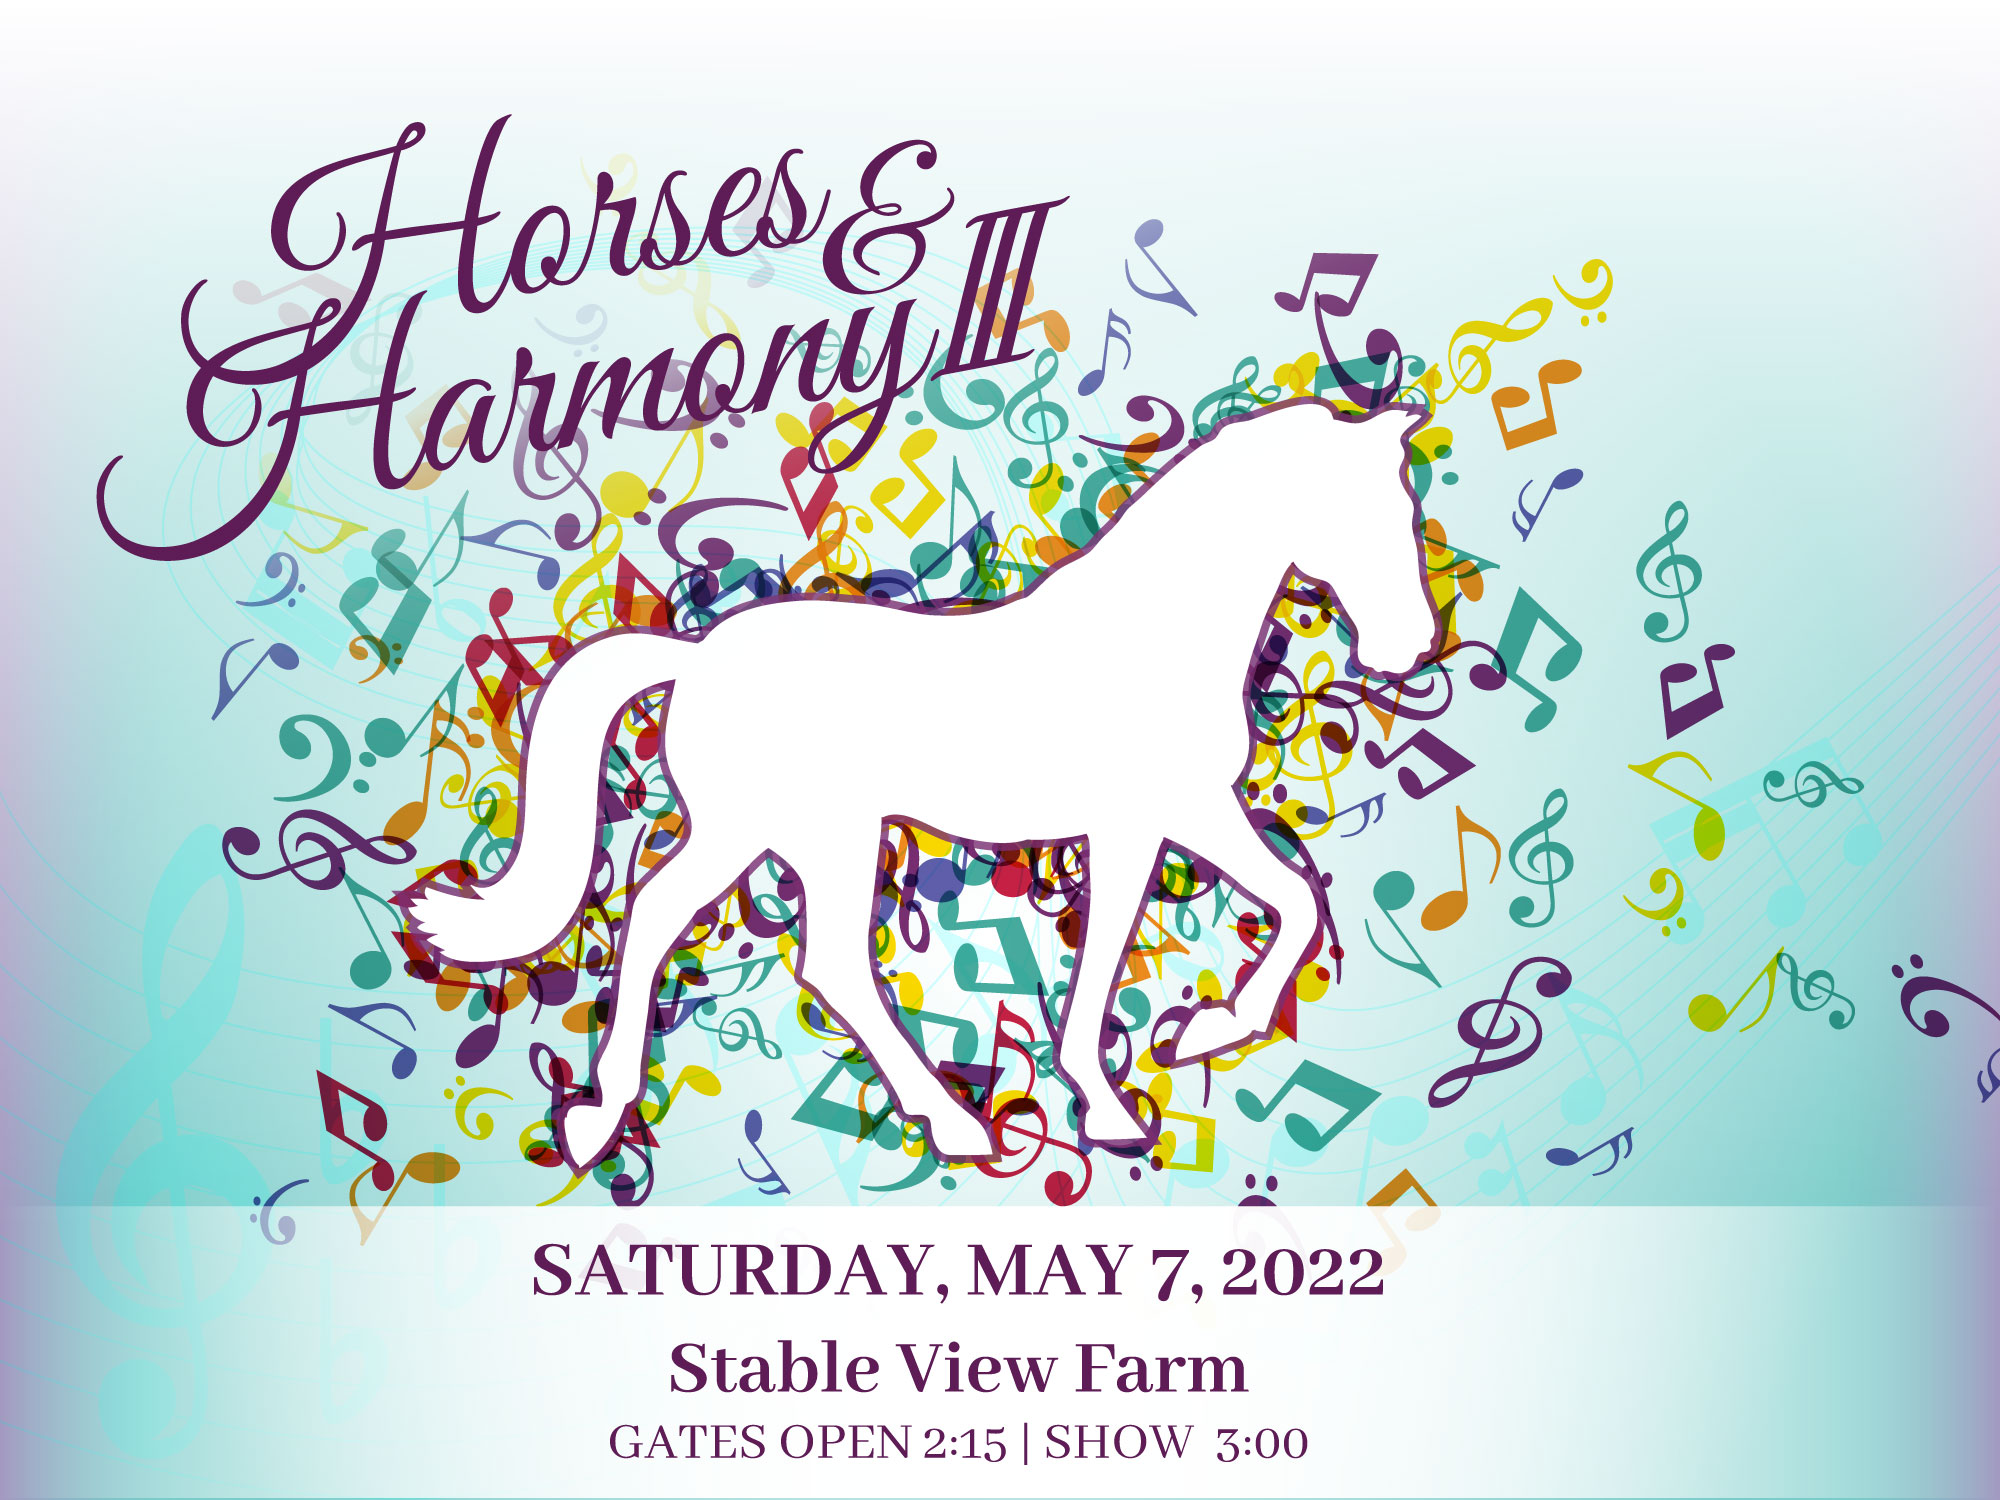 Horses and Harmony III May 7, 2022, Stable View Farm